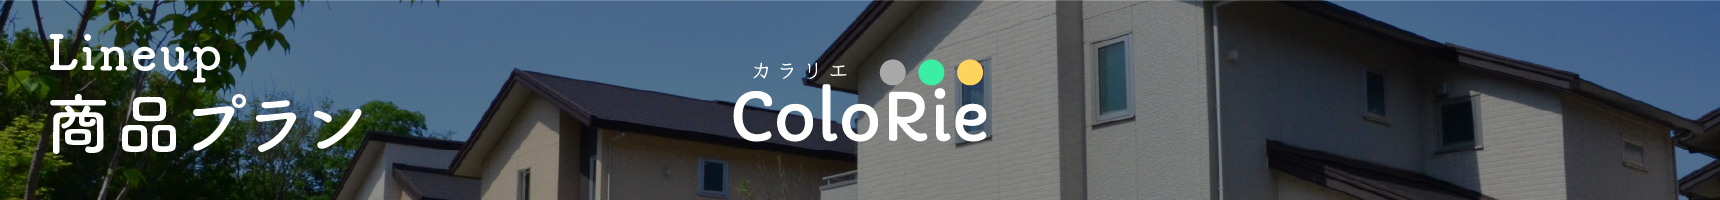 Colorie 〜カラリエ〜